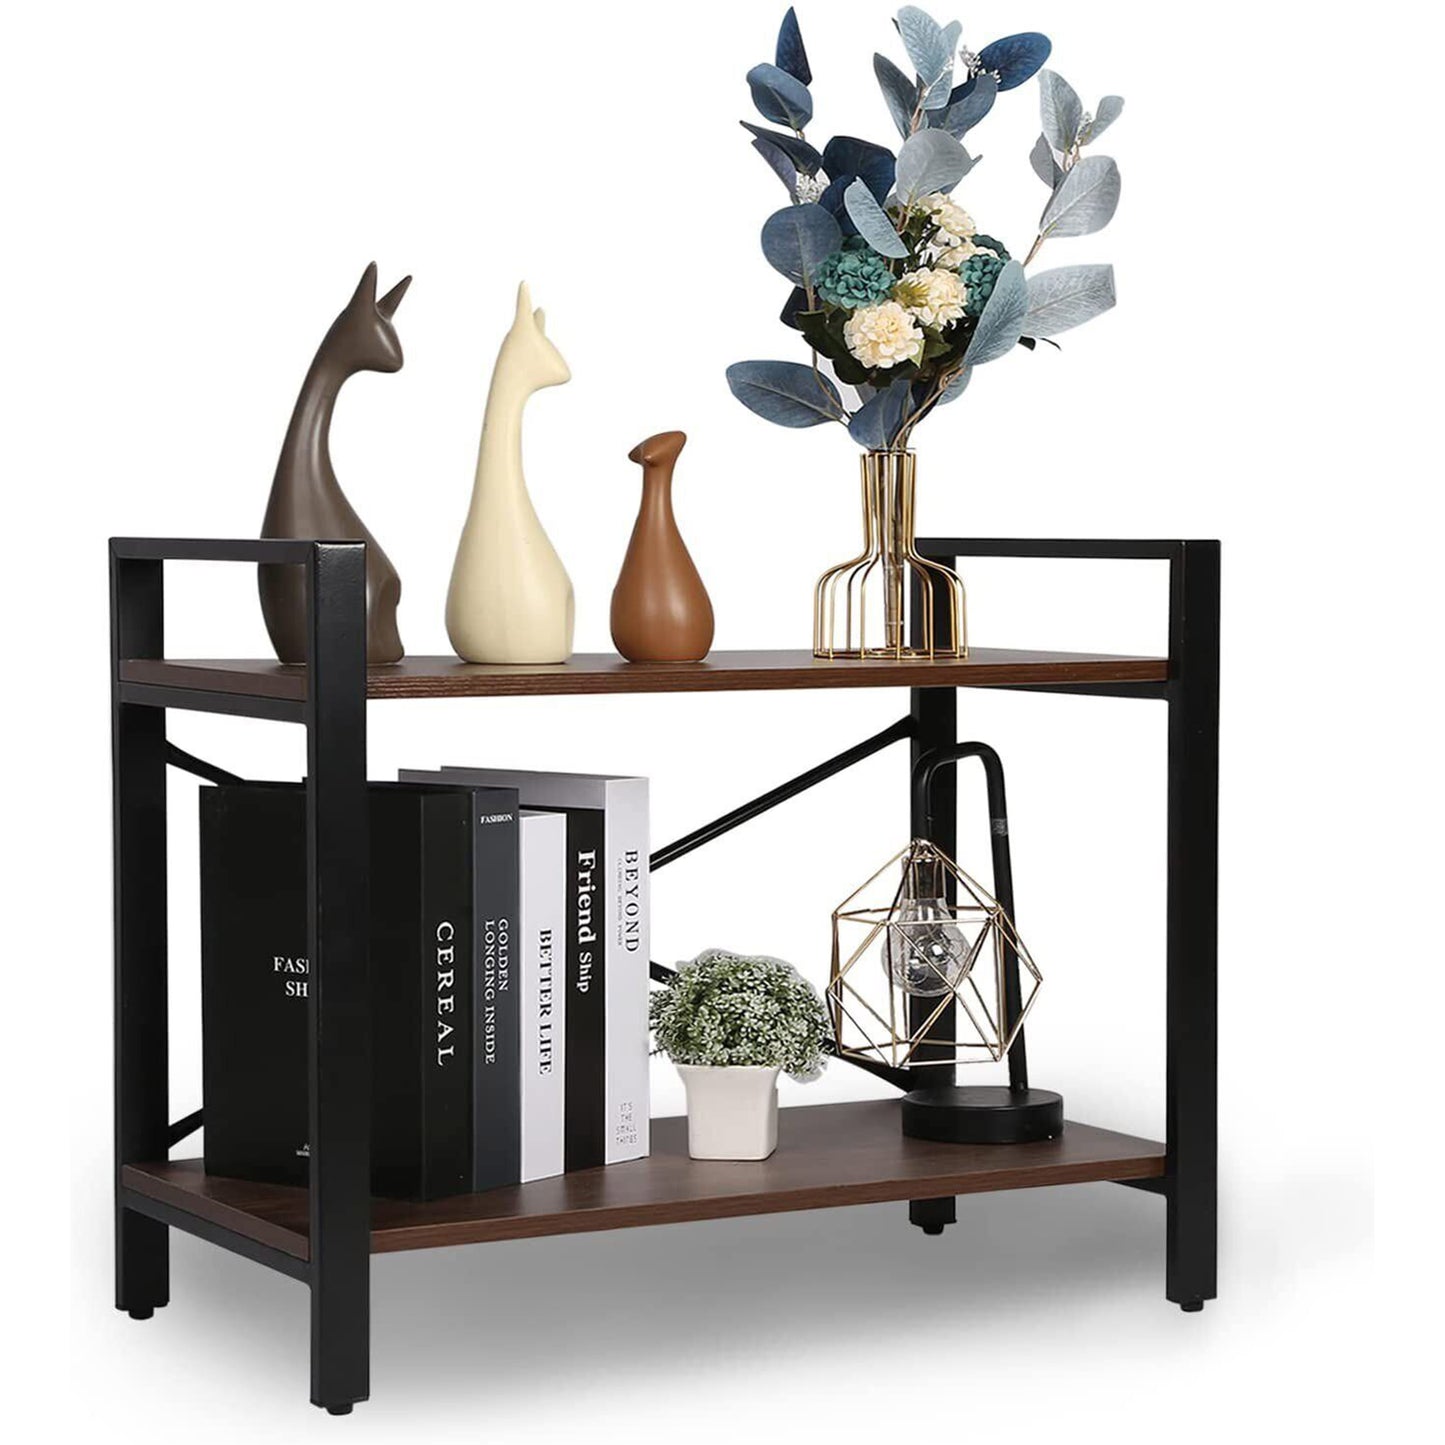 Bookshelf with Rack and Stackable Shelf - 2Tier Vintage Style Bookcase